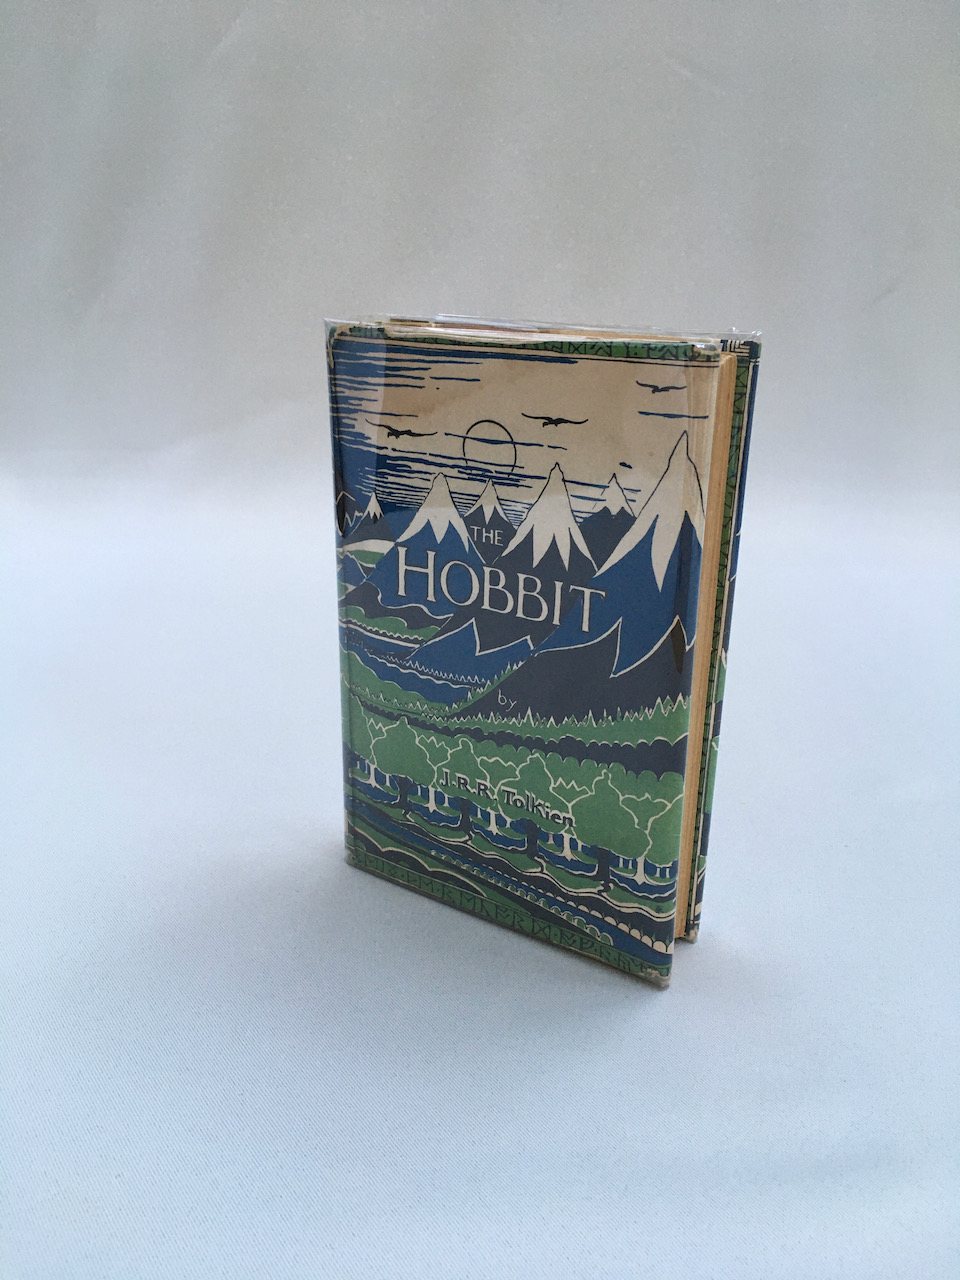 The Hobbit, or There and Back Again, by J.R.R. Tolkien. Published by Allen & Unwin in 1954